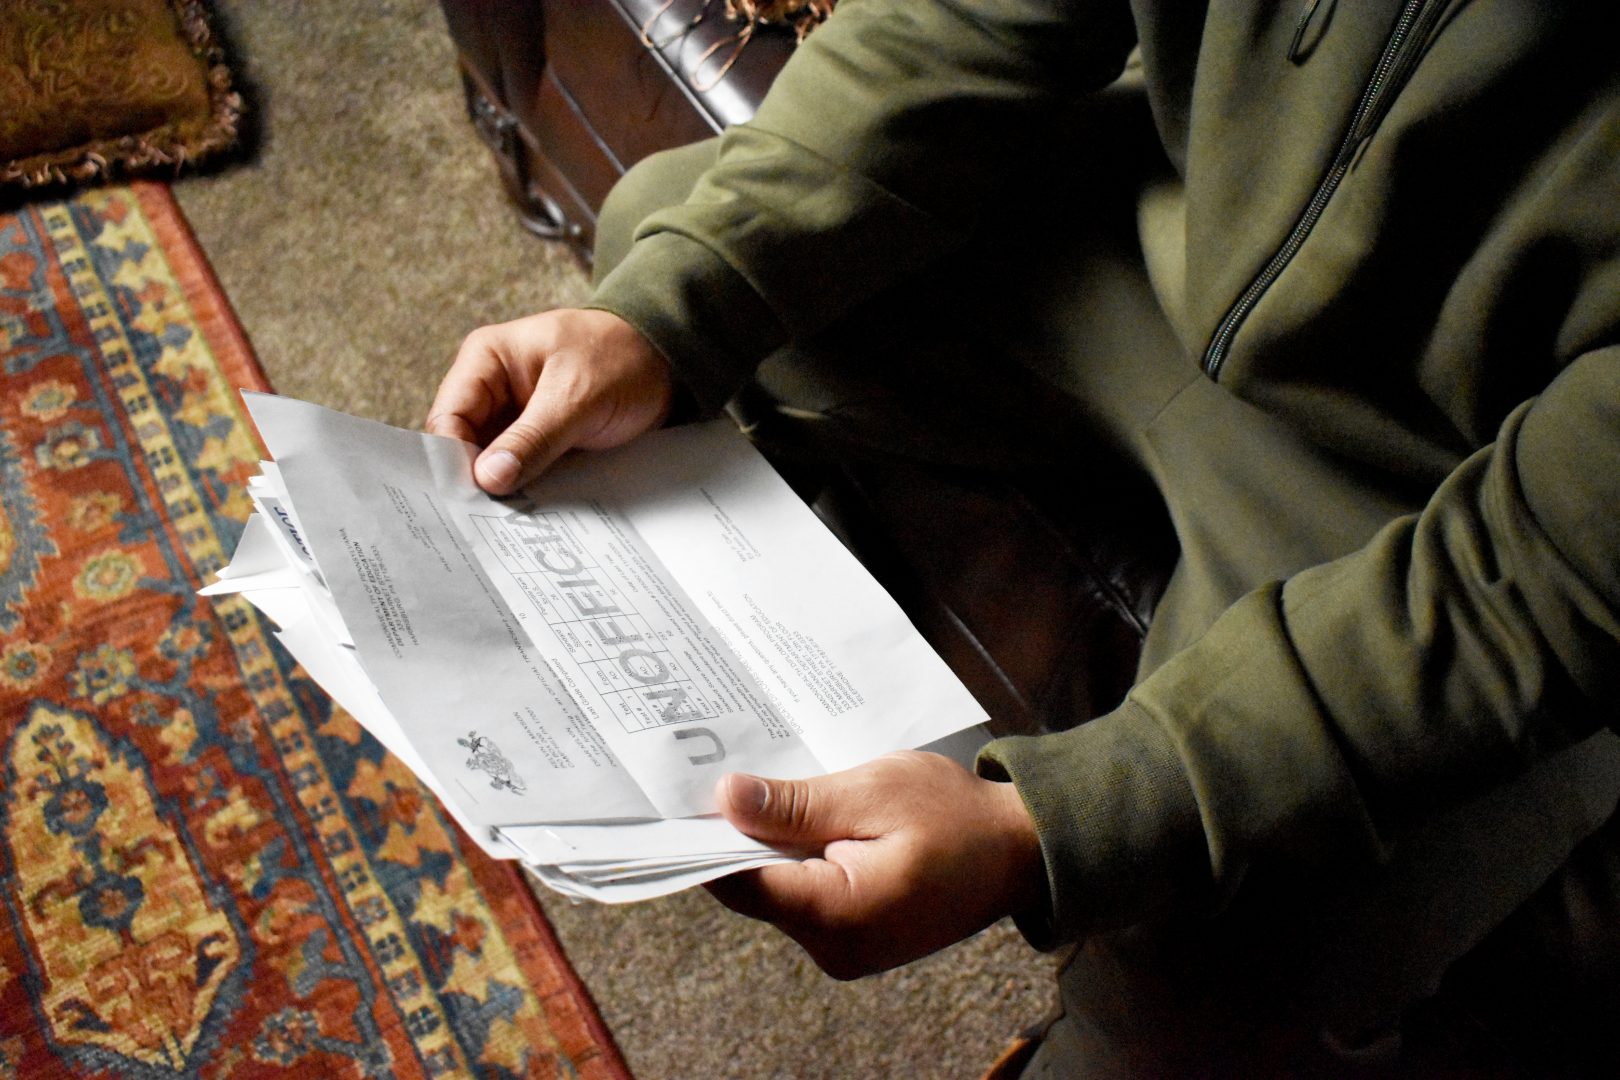 Kevin Maxson, a former inmate at Dauphin County Prison, goes through his letters and bills from his time locked up. A PA Post investigation found that six counties charged close to $15 million in fees to prisoners.  (Joseph Darius Jaafari/PA Post). 